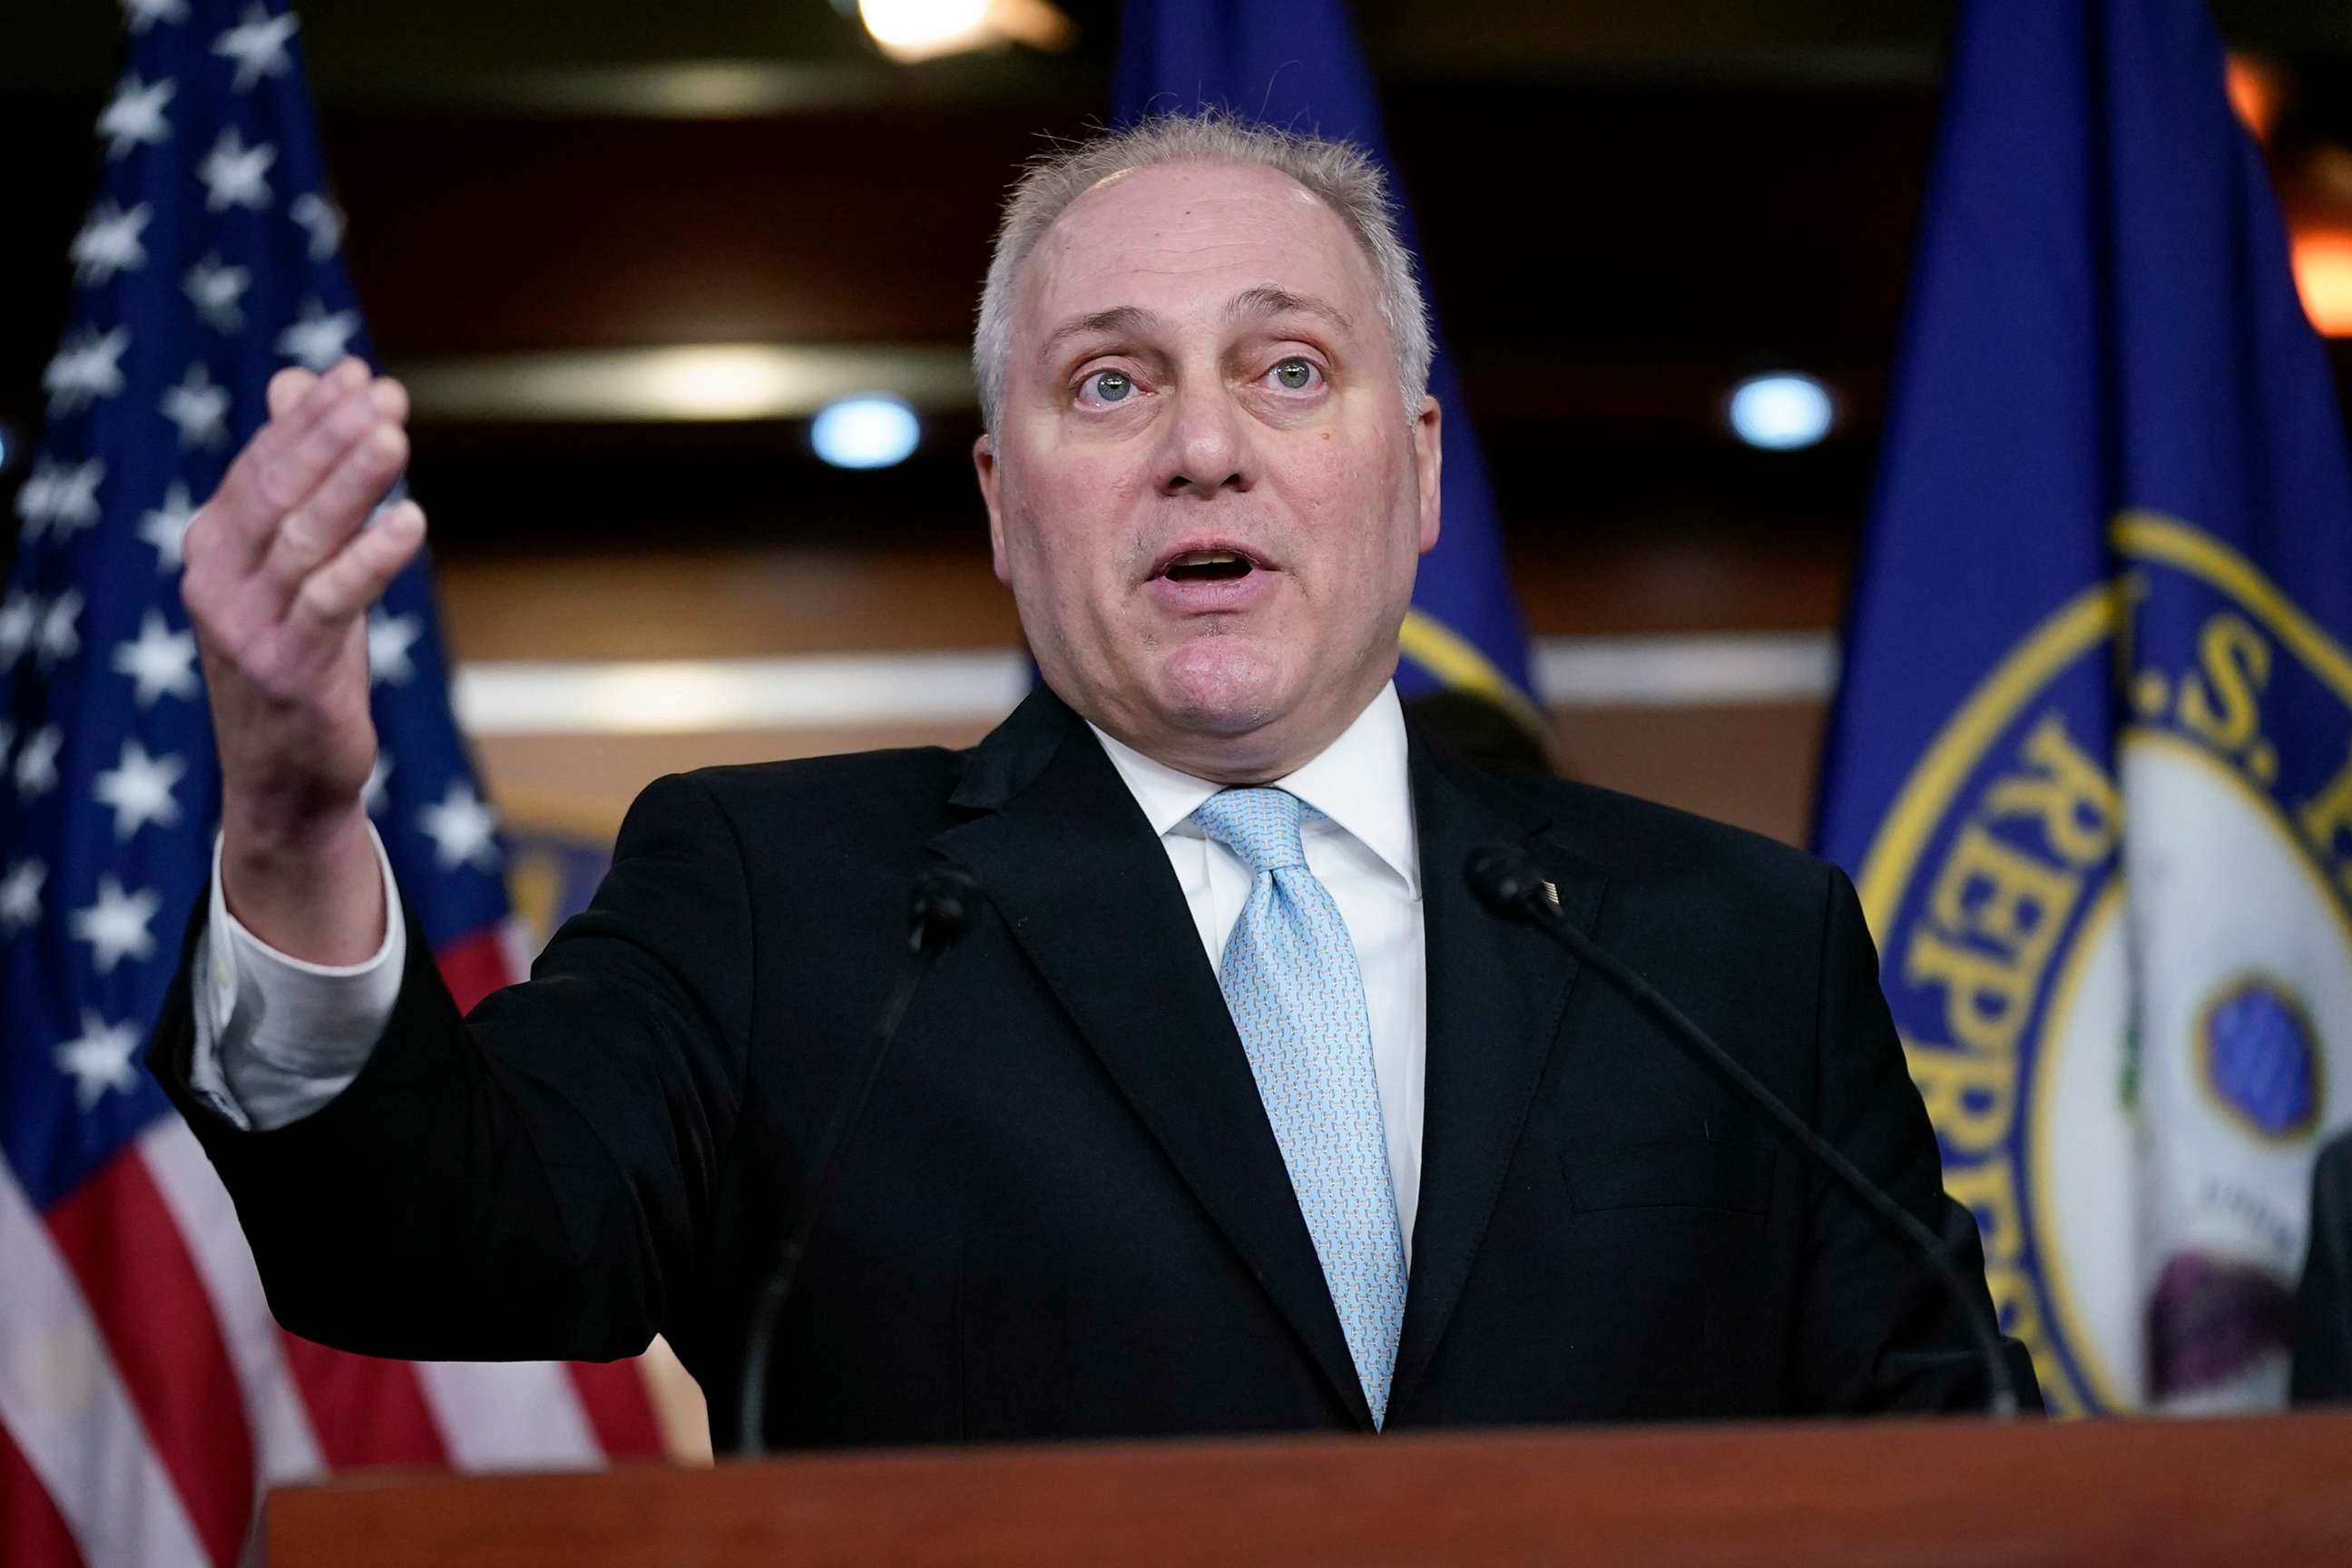 PHOTO: House Majority Leader Steve Scalise speaks at a news conference on Capitol Hill in Washington, D.C., Jan. 10, 2023.